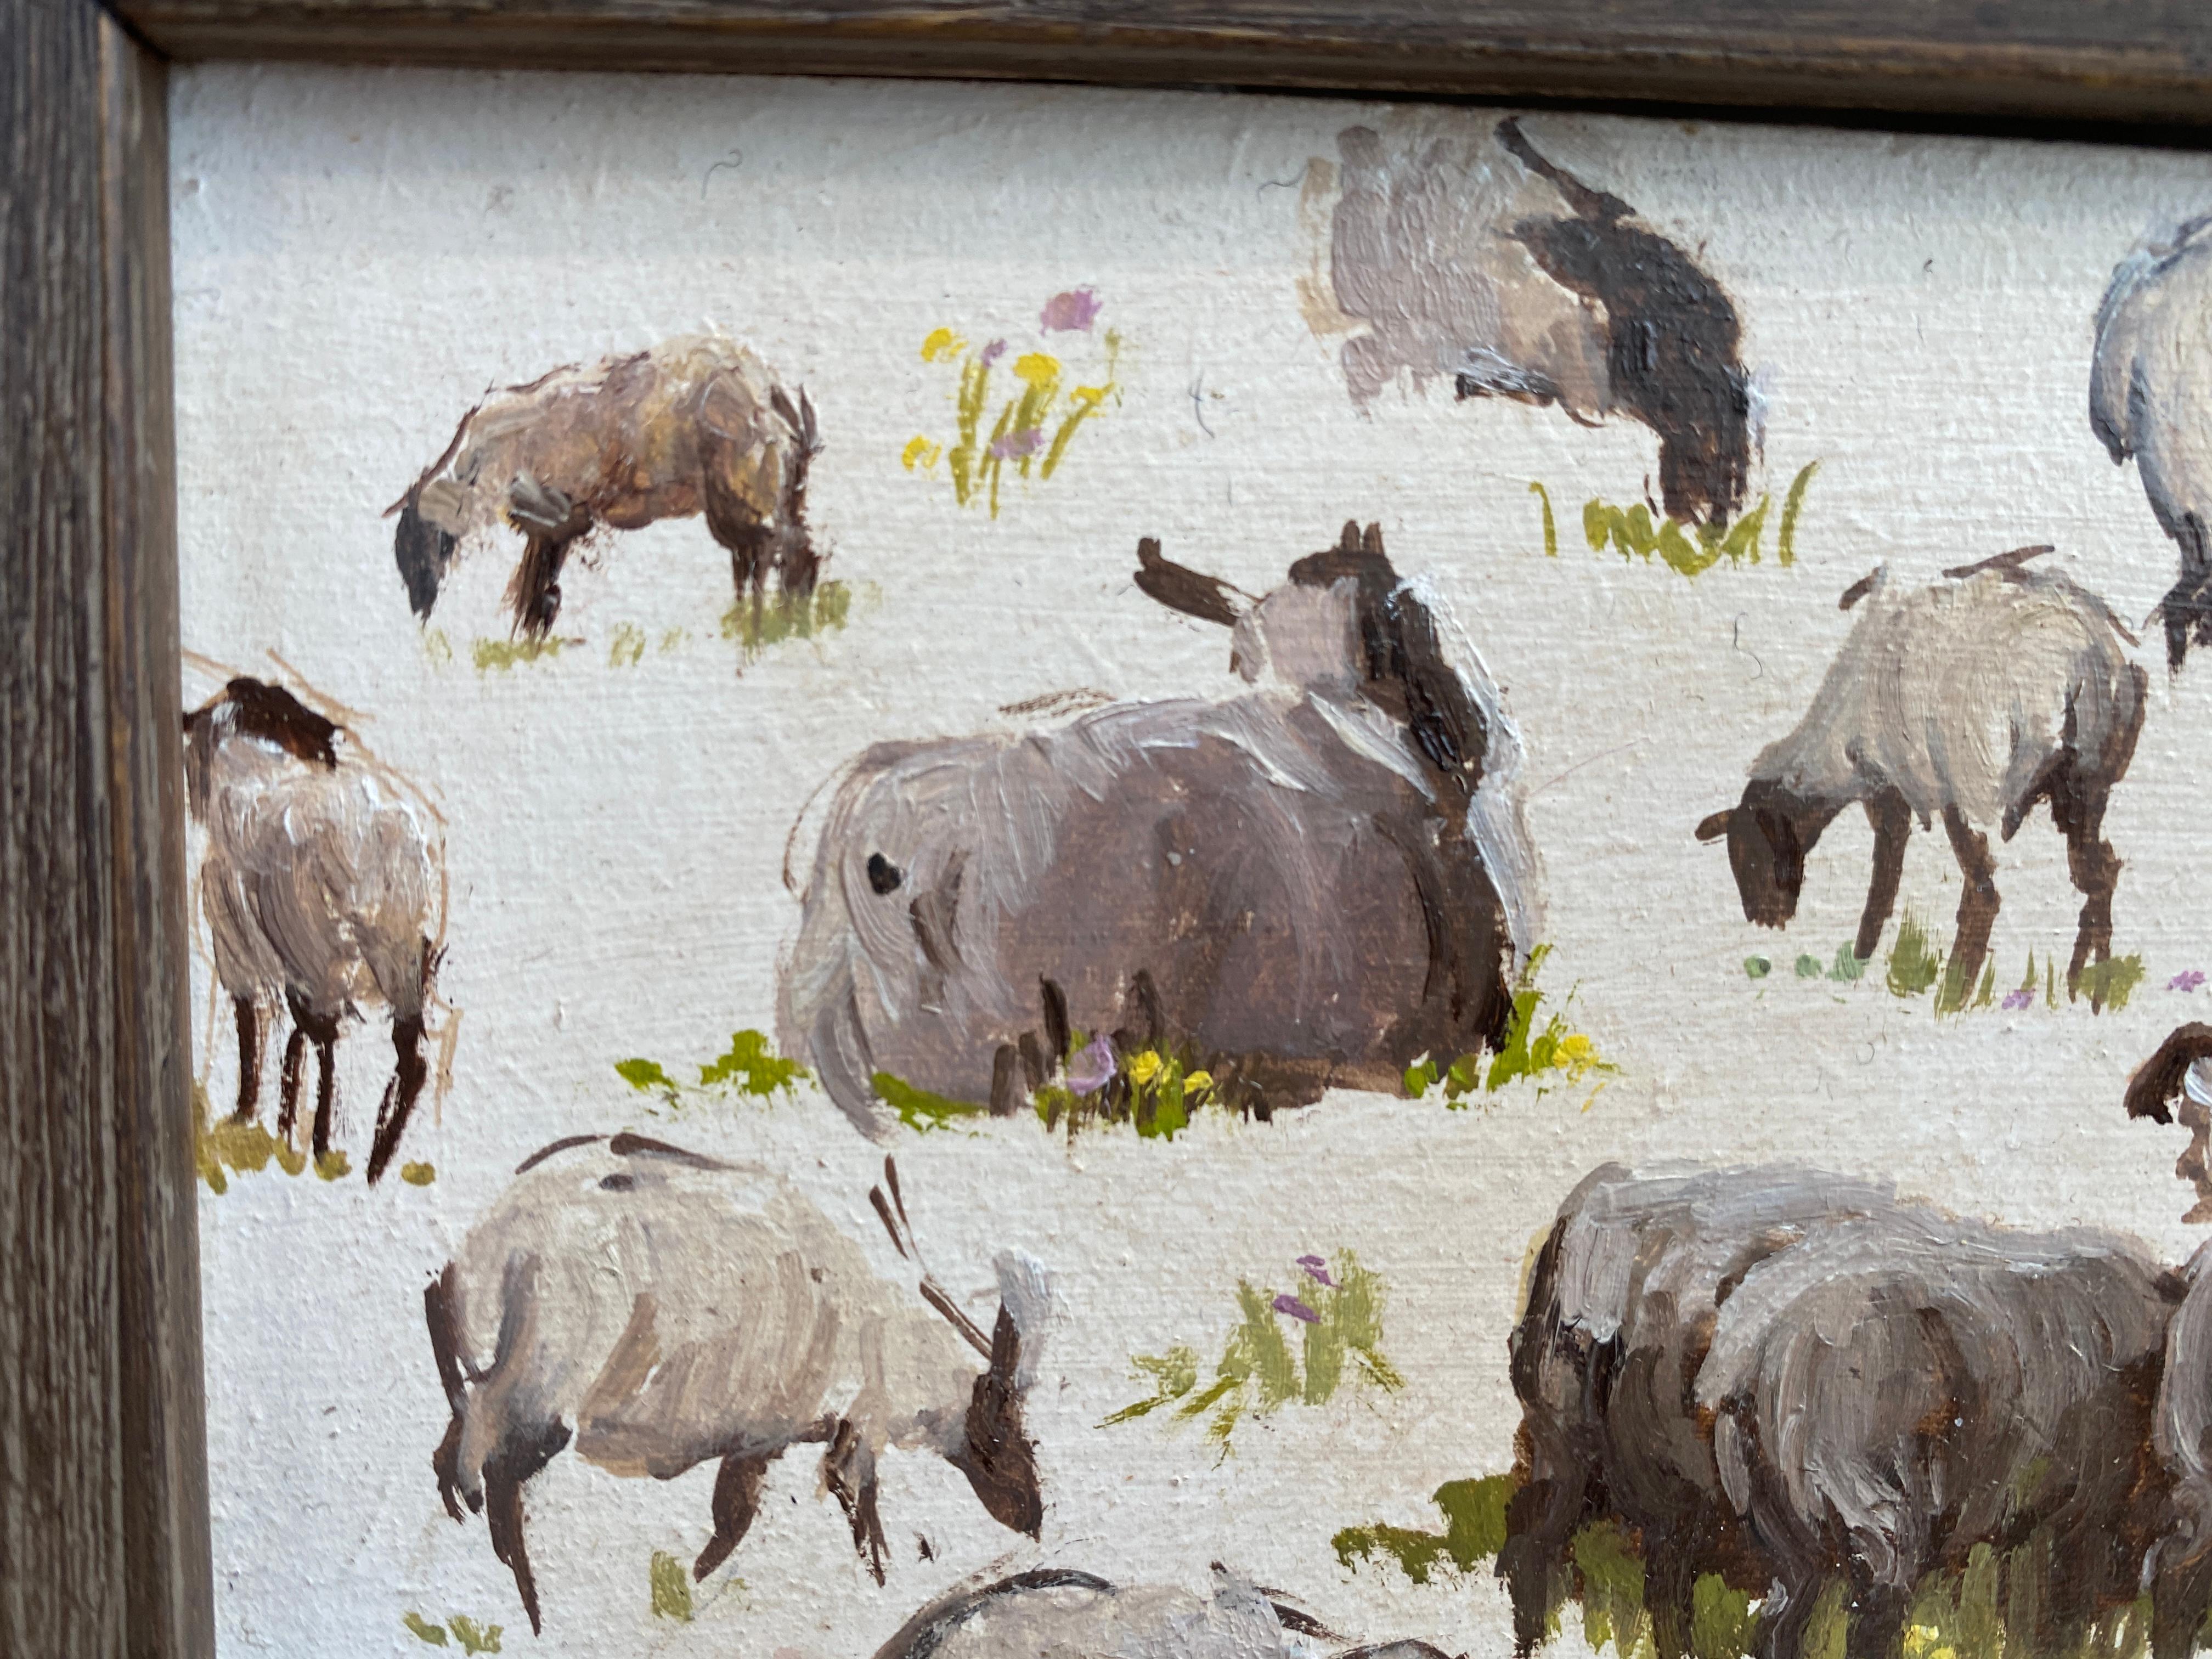 A miniature painting of sheep, as seen from various angles. A study for a larger composition. 

Painting dimensions: 3.38 x 6 inches
Framed dimensions: 8 x 10.25 inches

Framed in a natural-washed wood, traditional frame. 

Artist Bio
Rachel